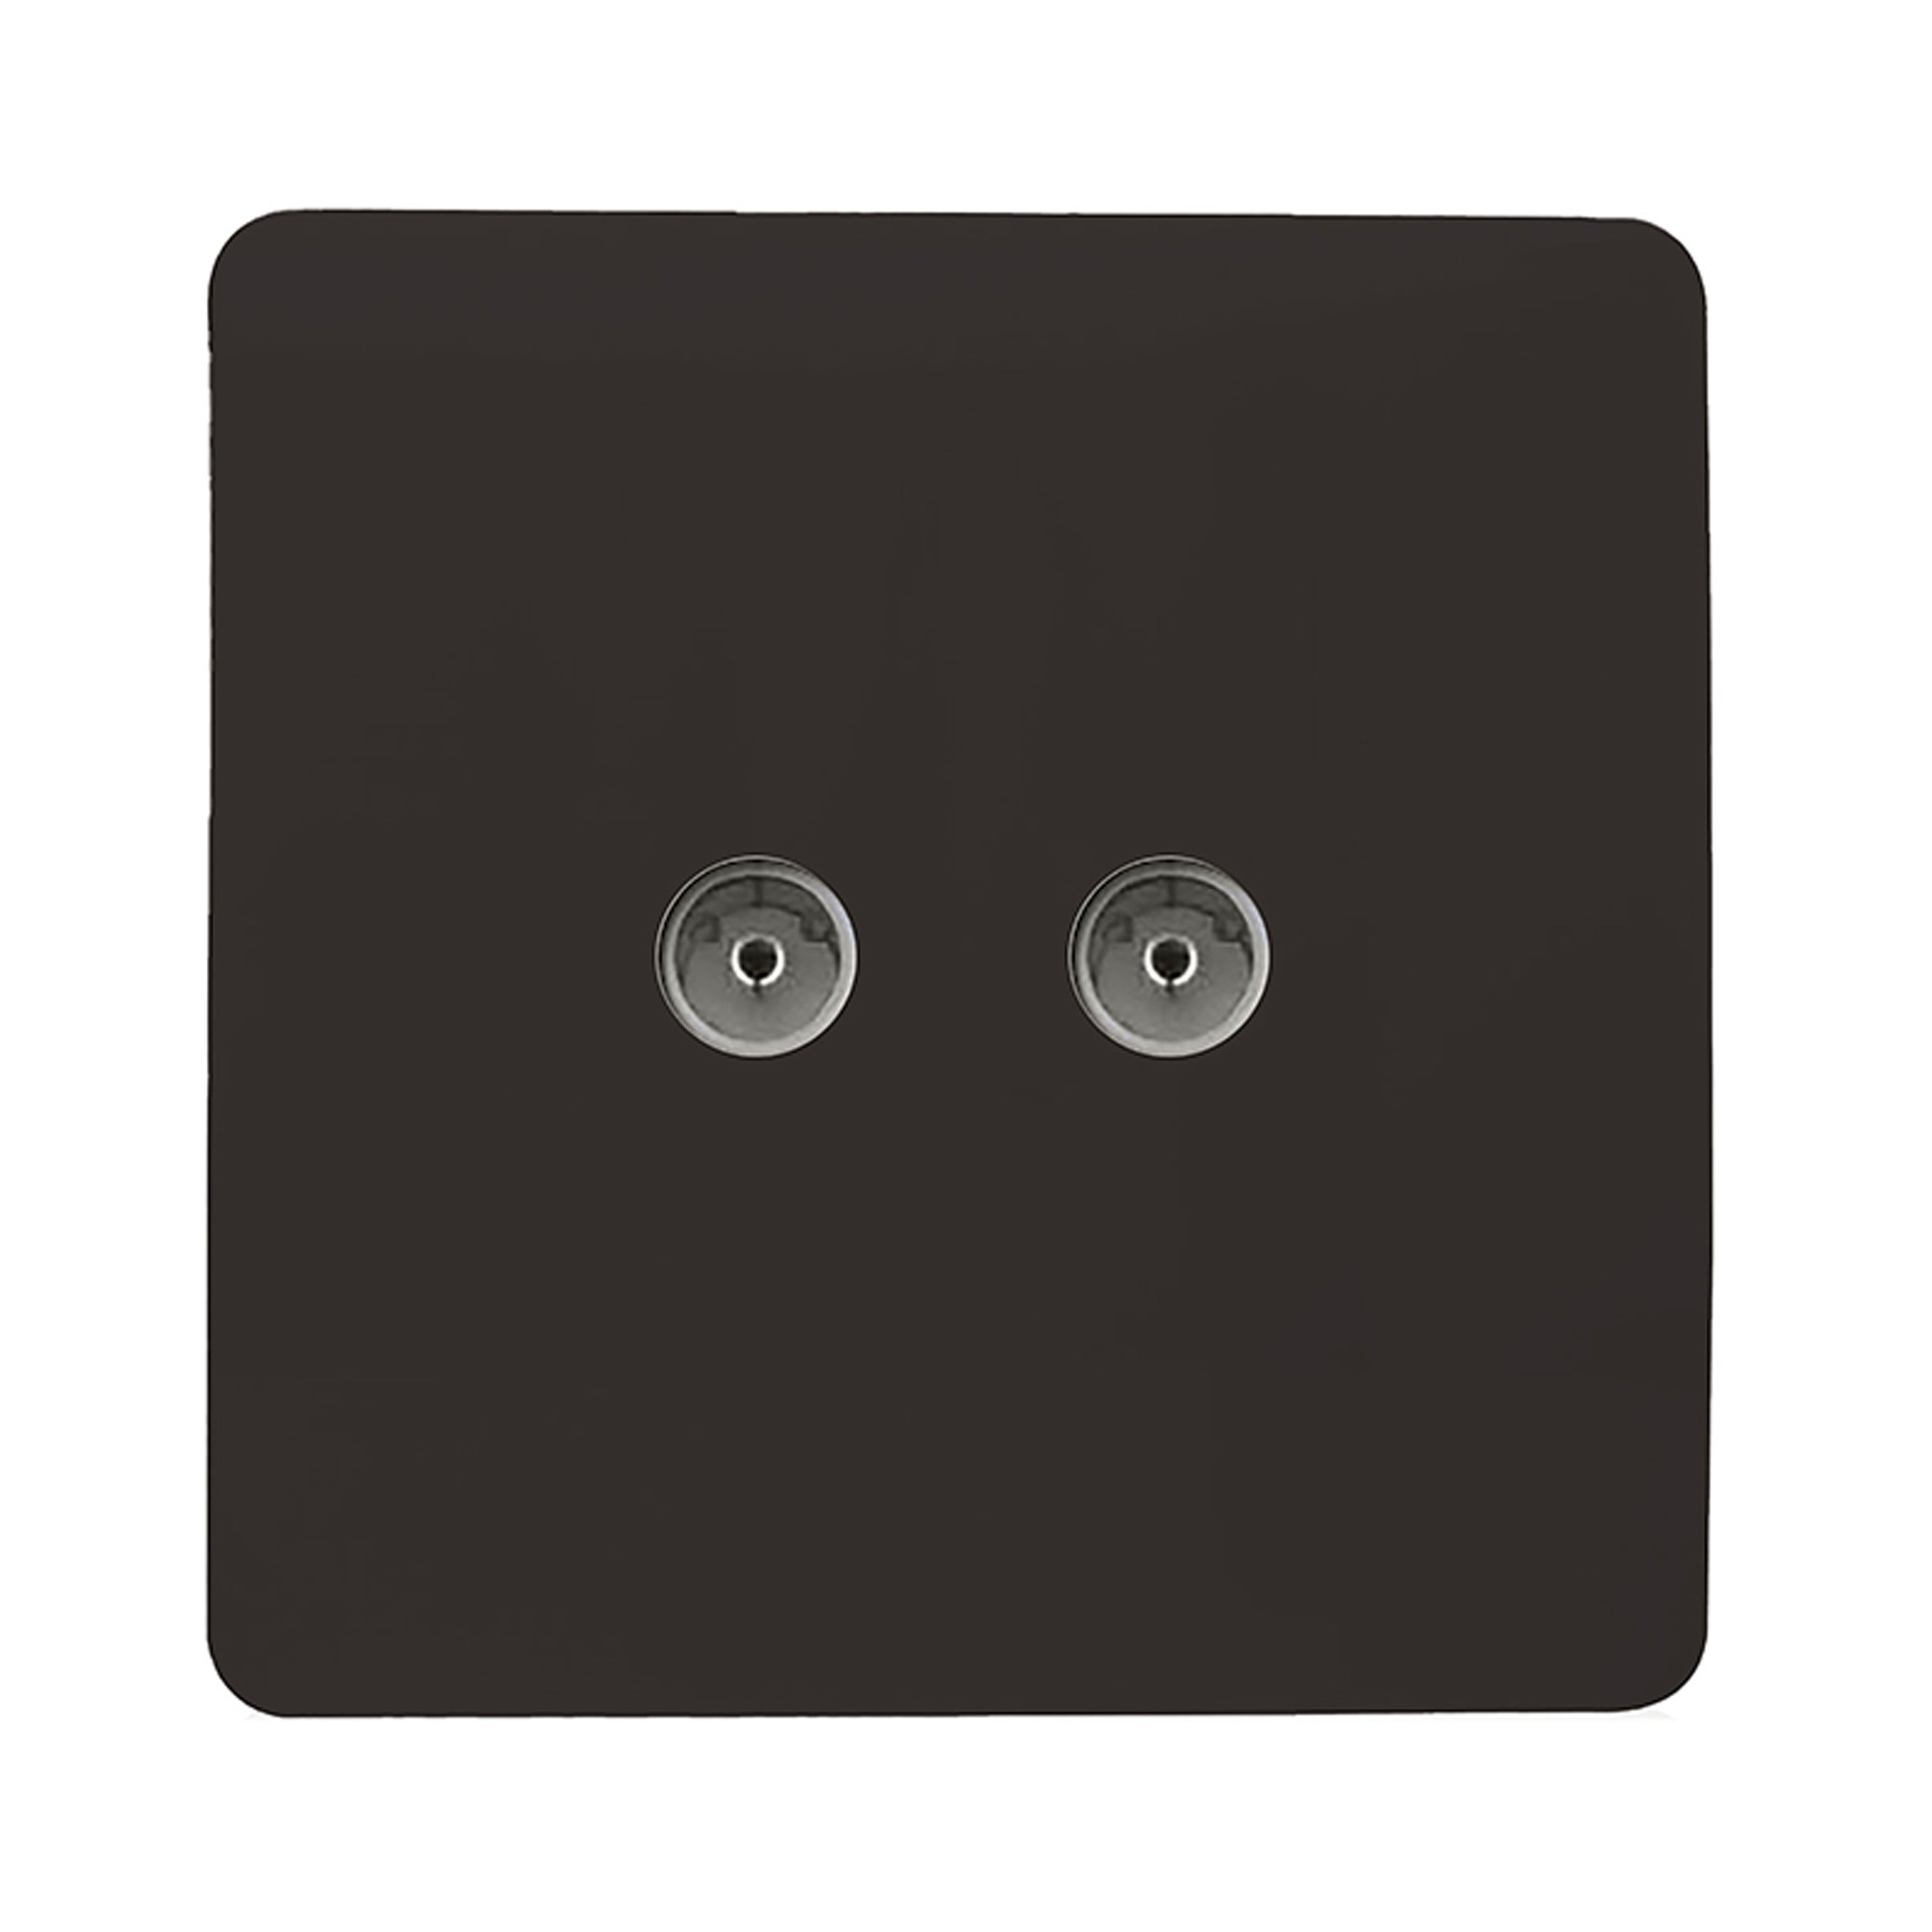 ART-2TVSDB  Twin TV Co-Axial Outlet Dark Brown